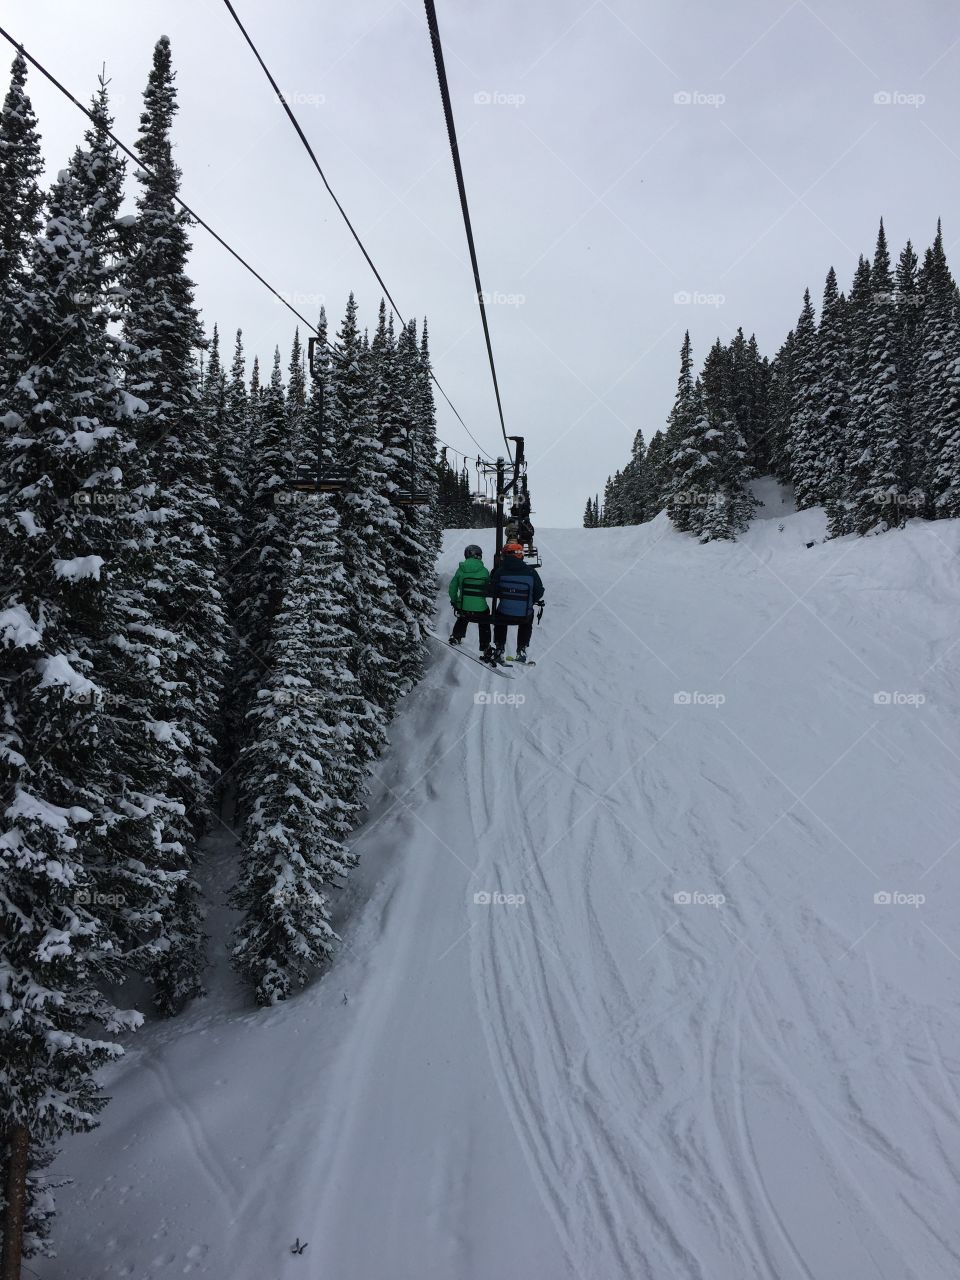 Chairlift in Crested butte Colorado 